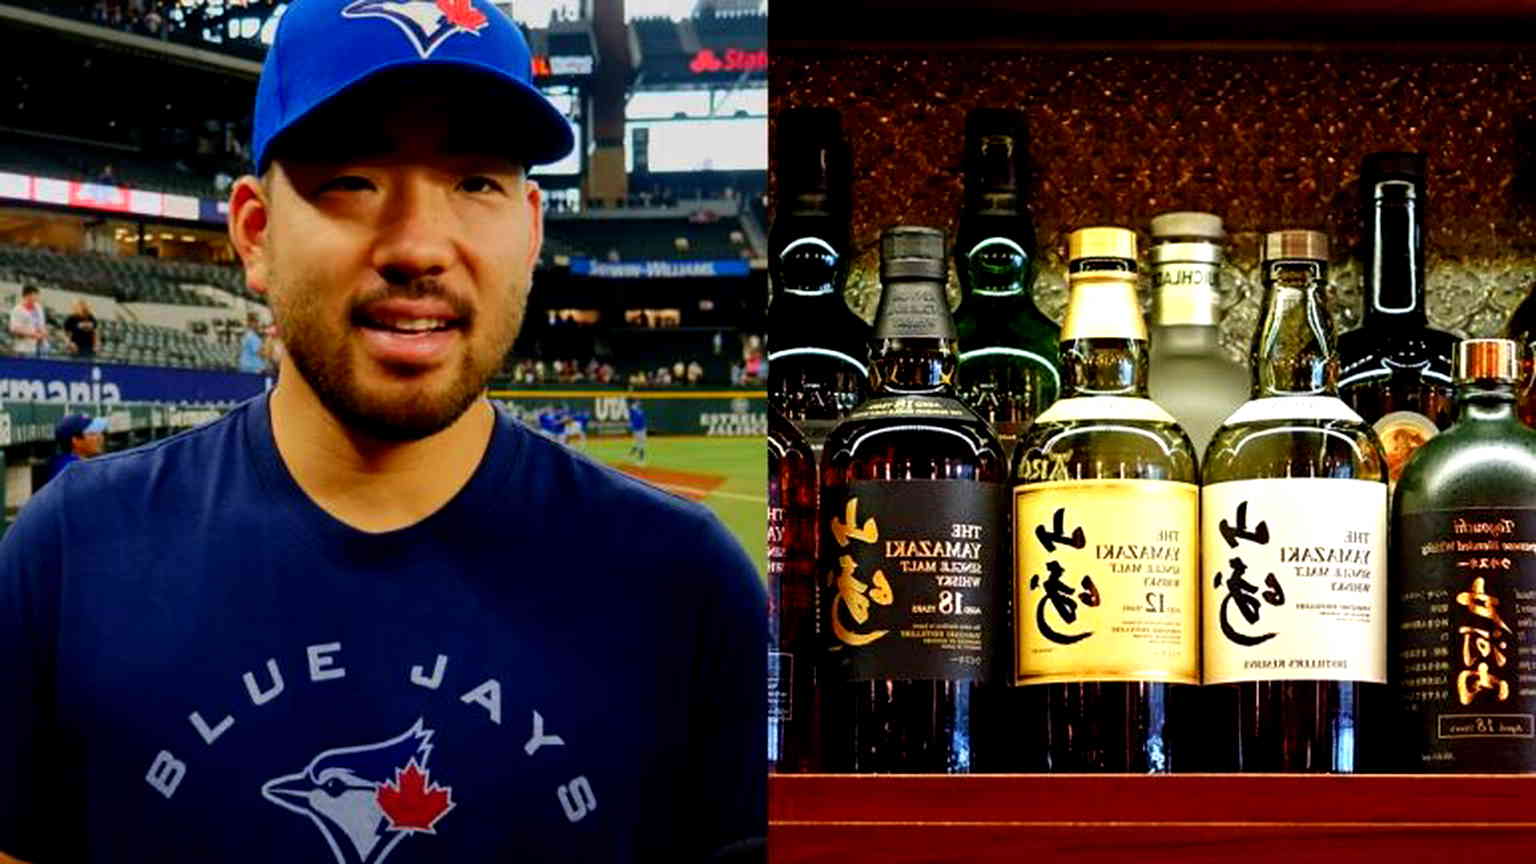 Blue Jays pitcher shares $3,000 bottle of Japanese whisky after every win